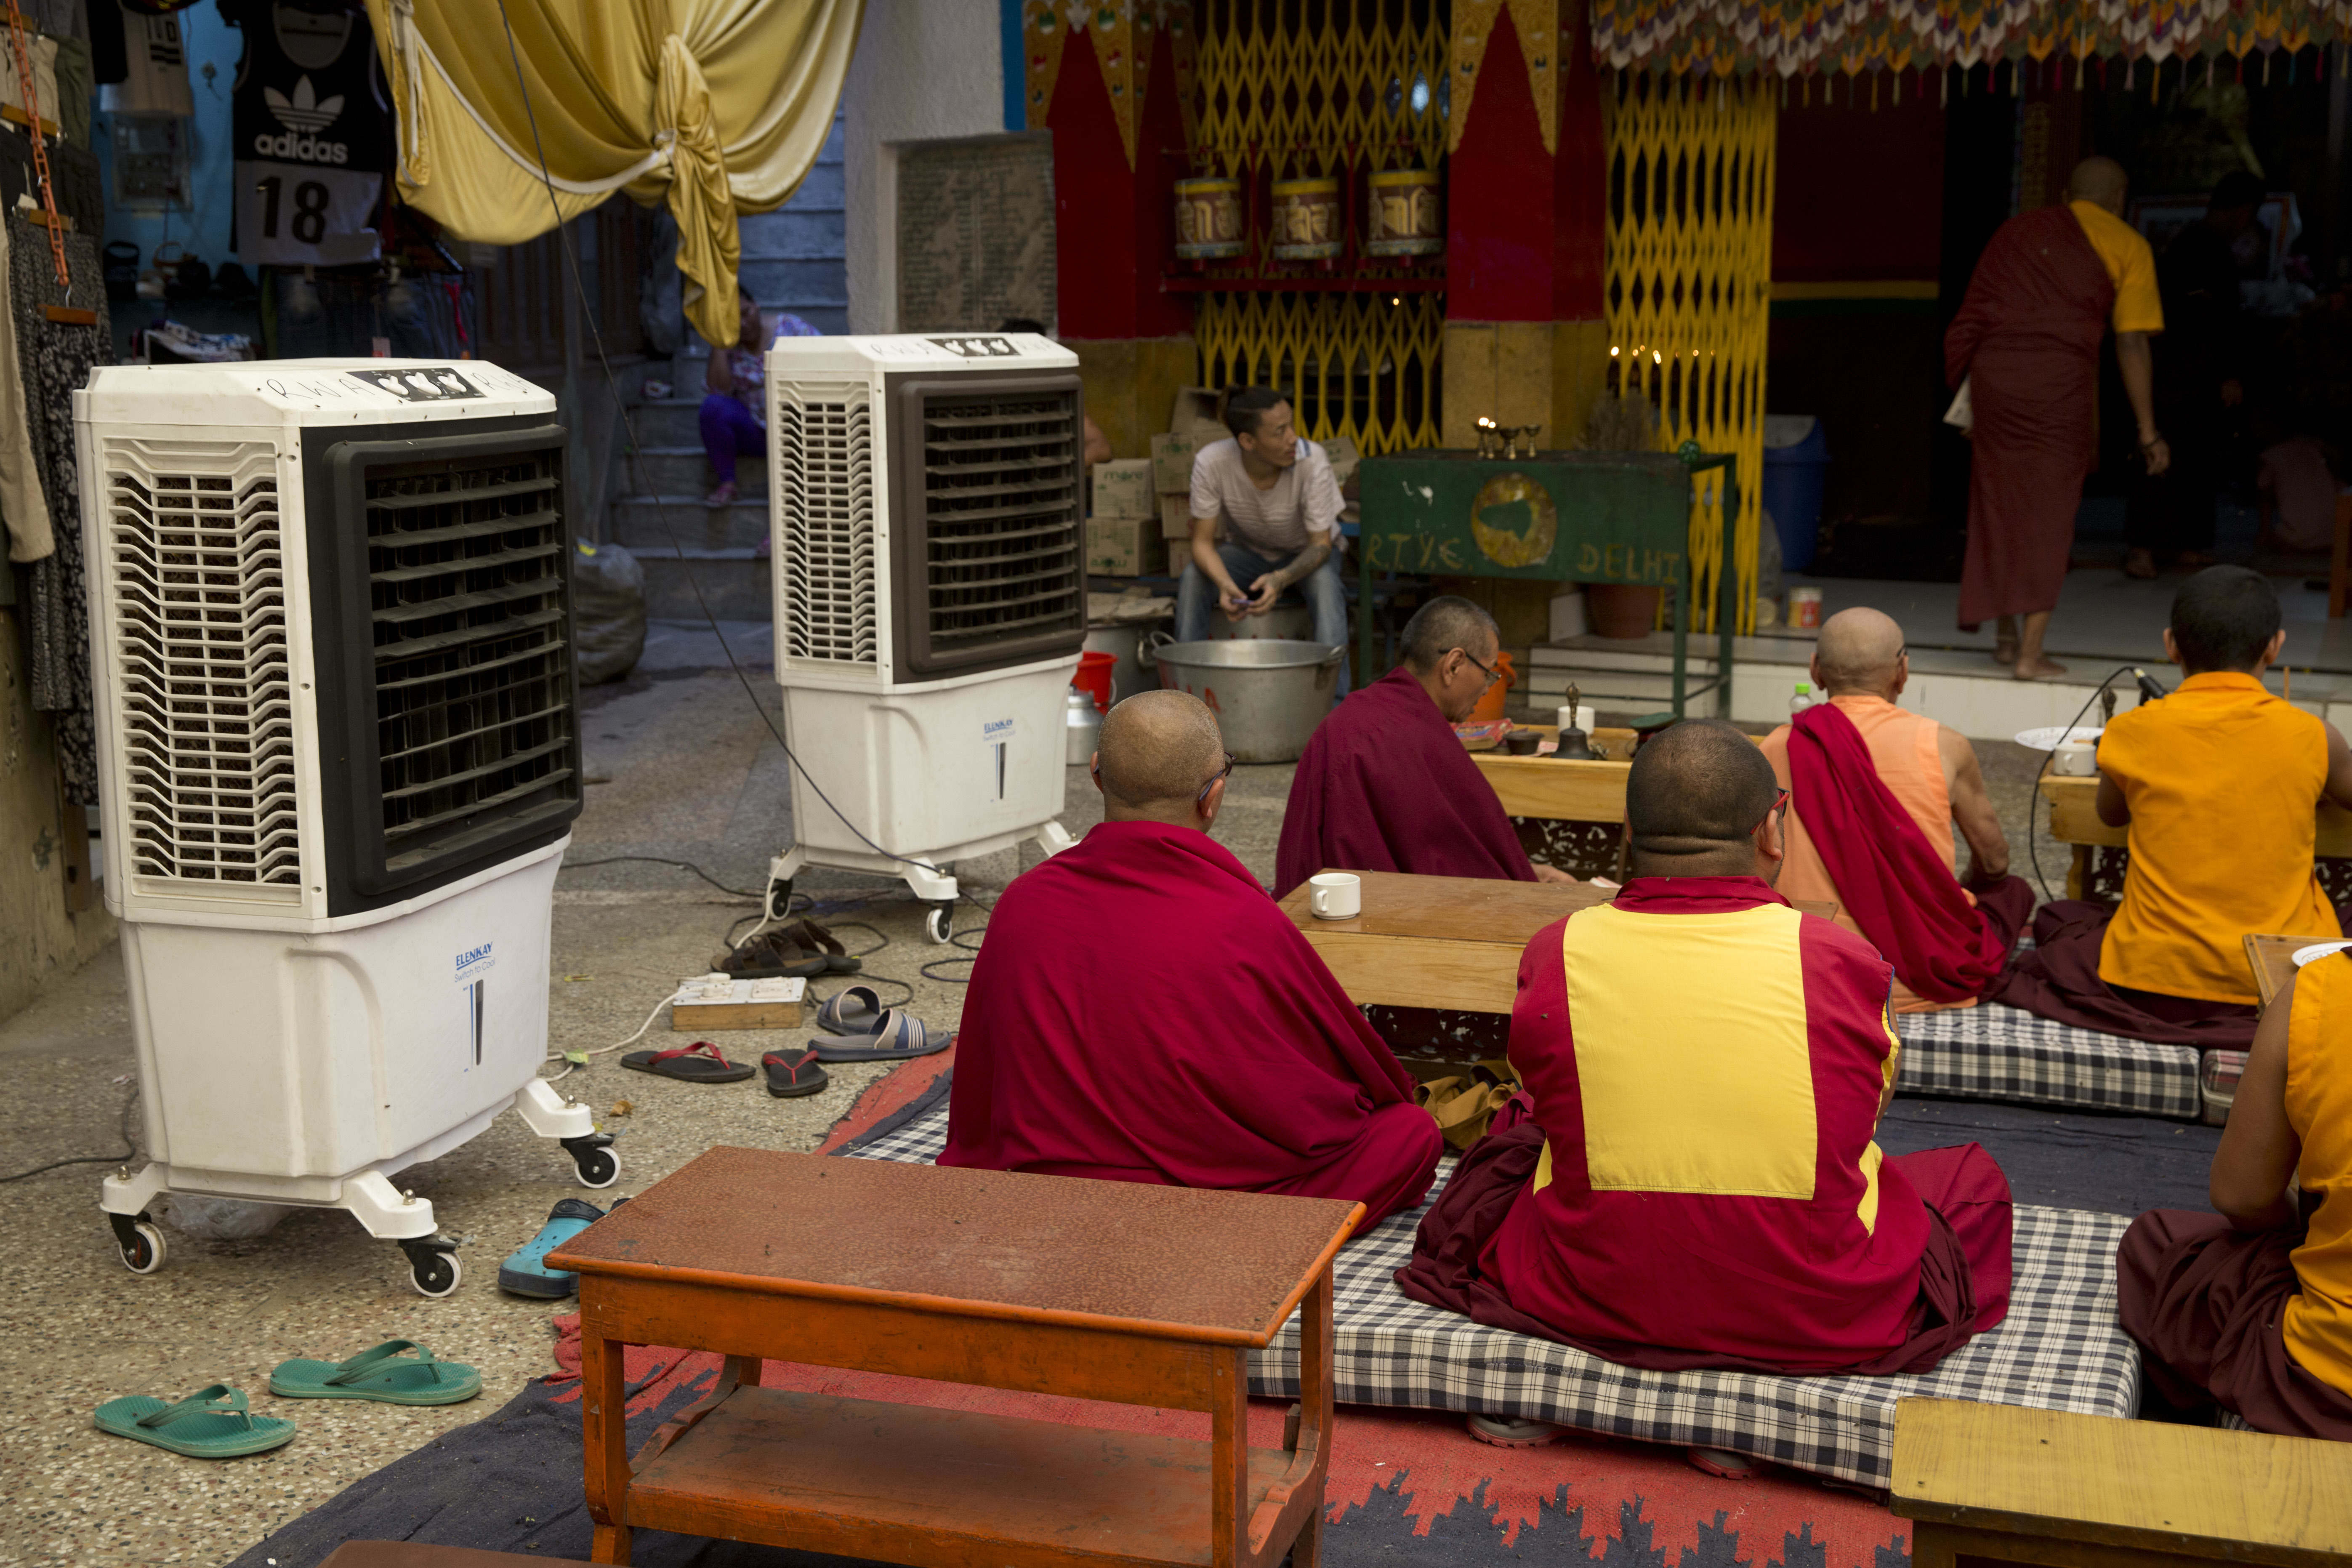 Exile Tibetan monks use air coolers to ward off heat while they pray in New Delhi, India, Monday, June 5, 2017. Most parts of northern India is reeling under intense heat wave conditions with the temperature crossing over 43 degrees Celsius (109.4 Fahrenheit).(AP Photo/Tsering Topgyal)